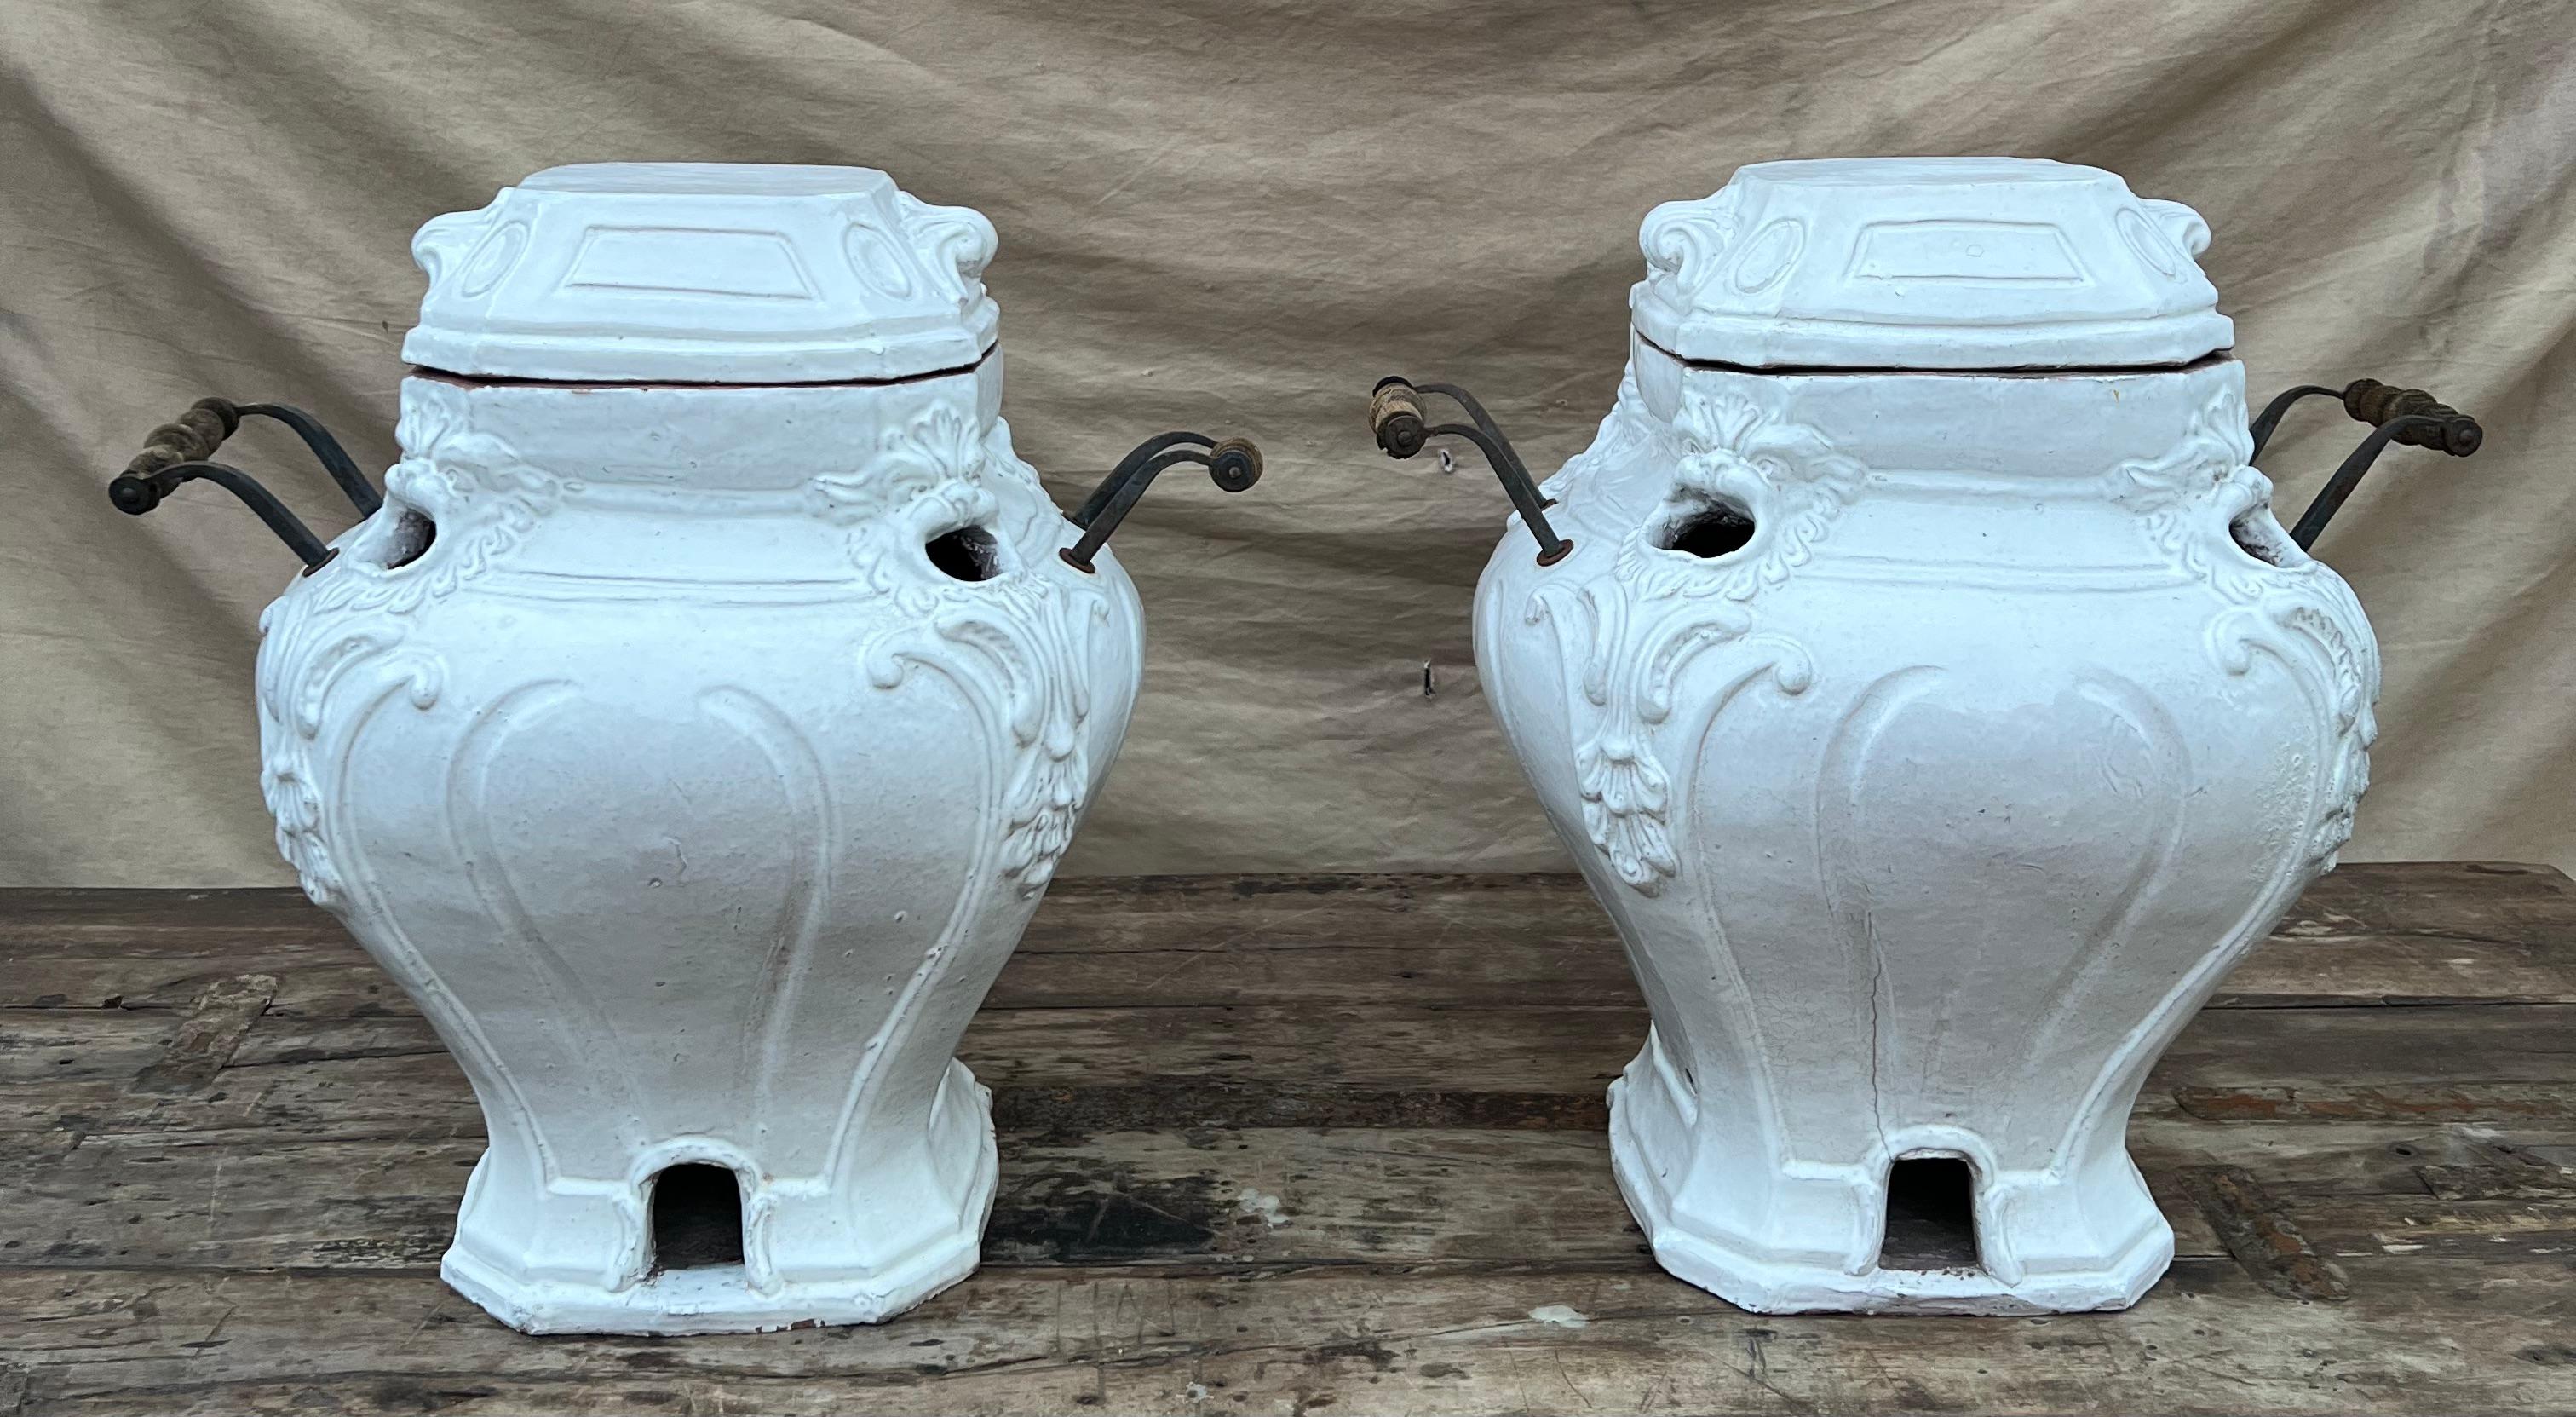 Pair of Glazed Terracotta Garden Urns or Jardinieres with Metal and Wood Handles For Sale 8